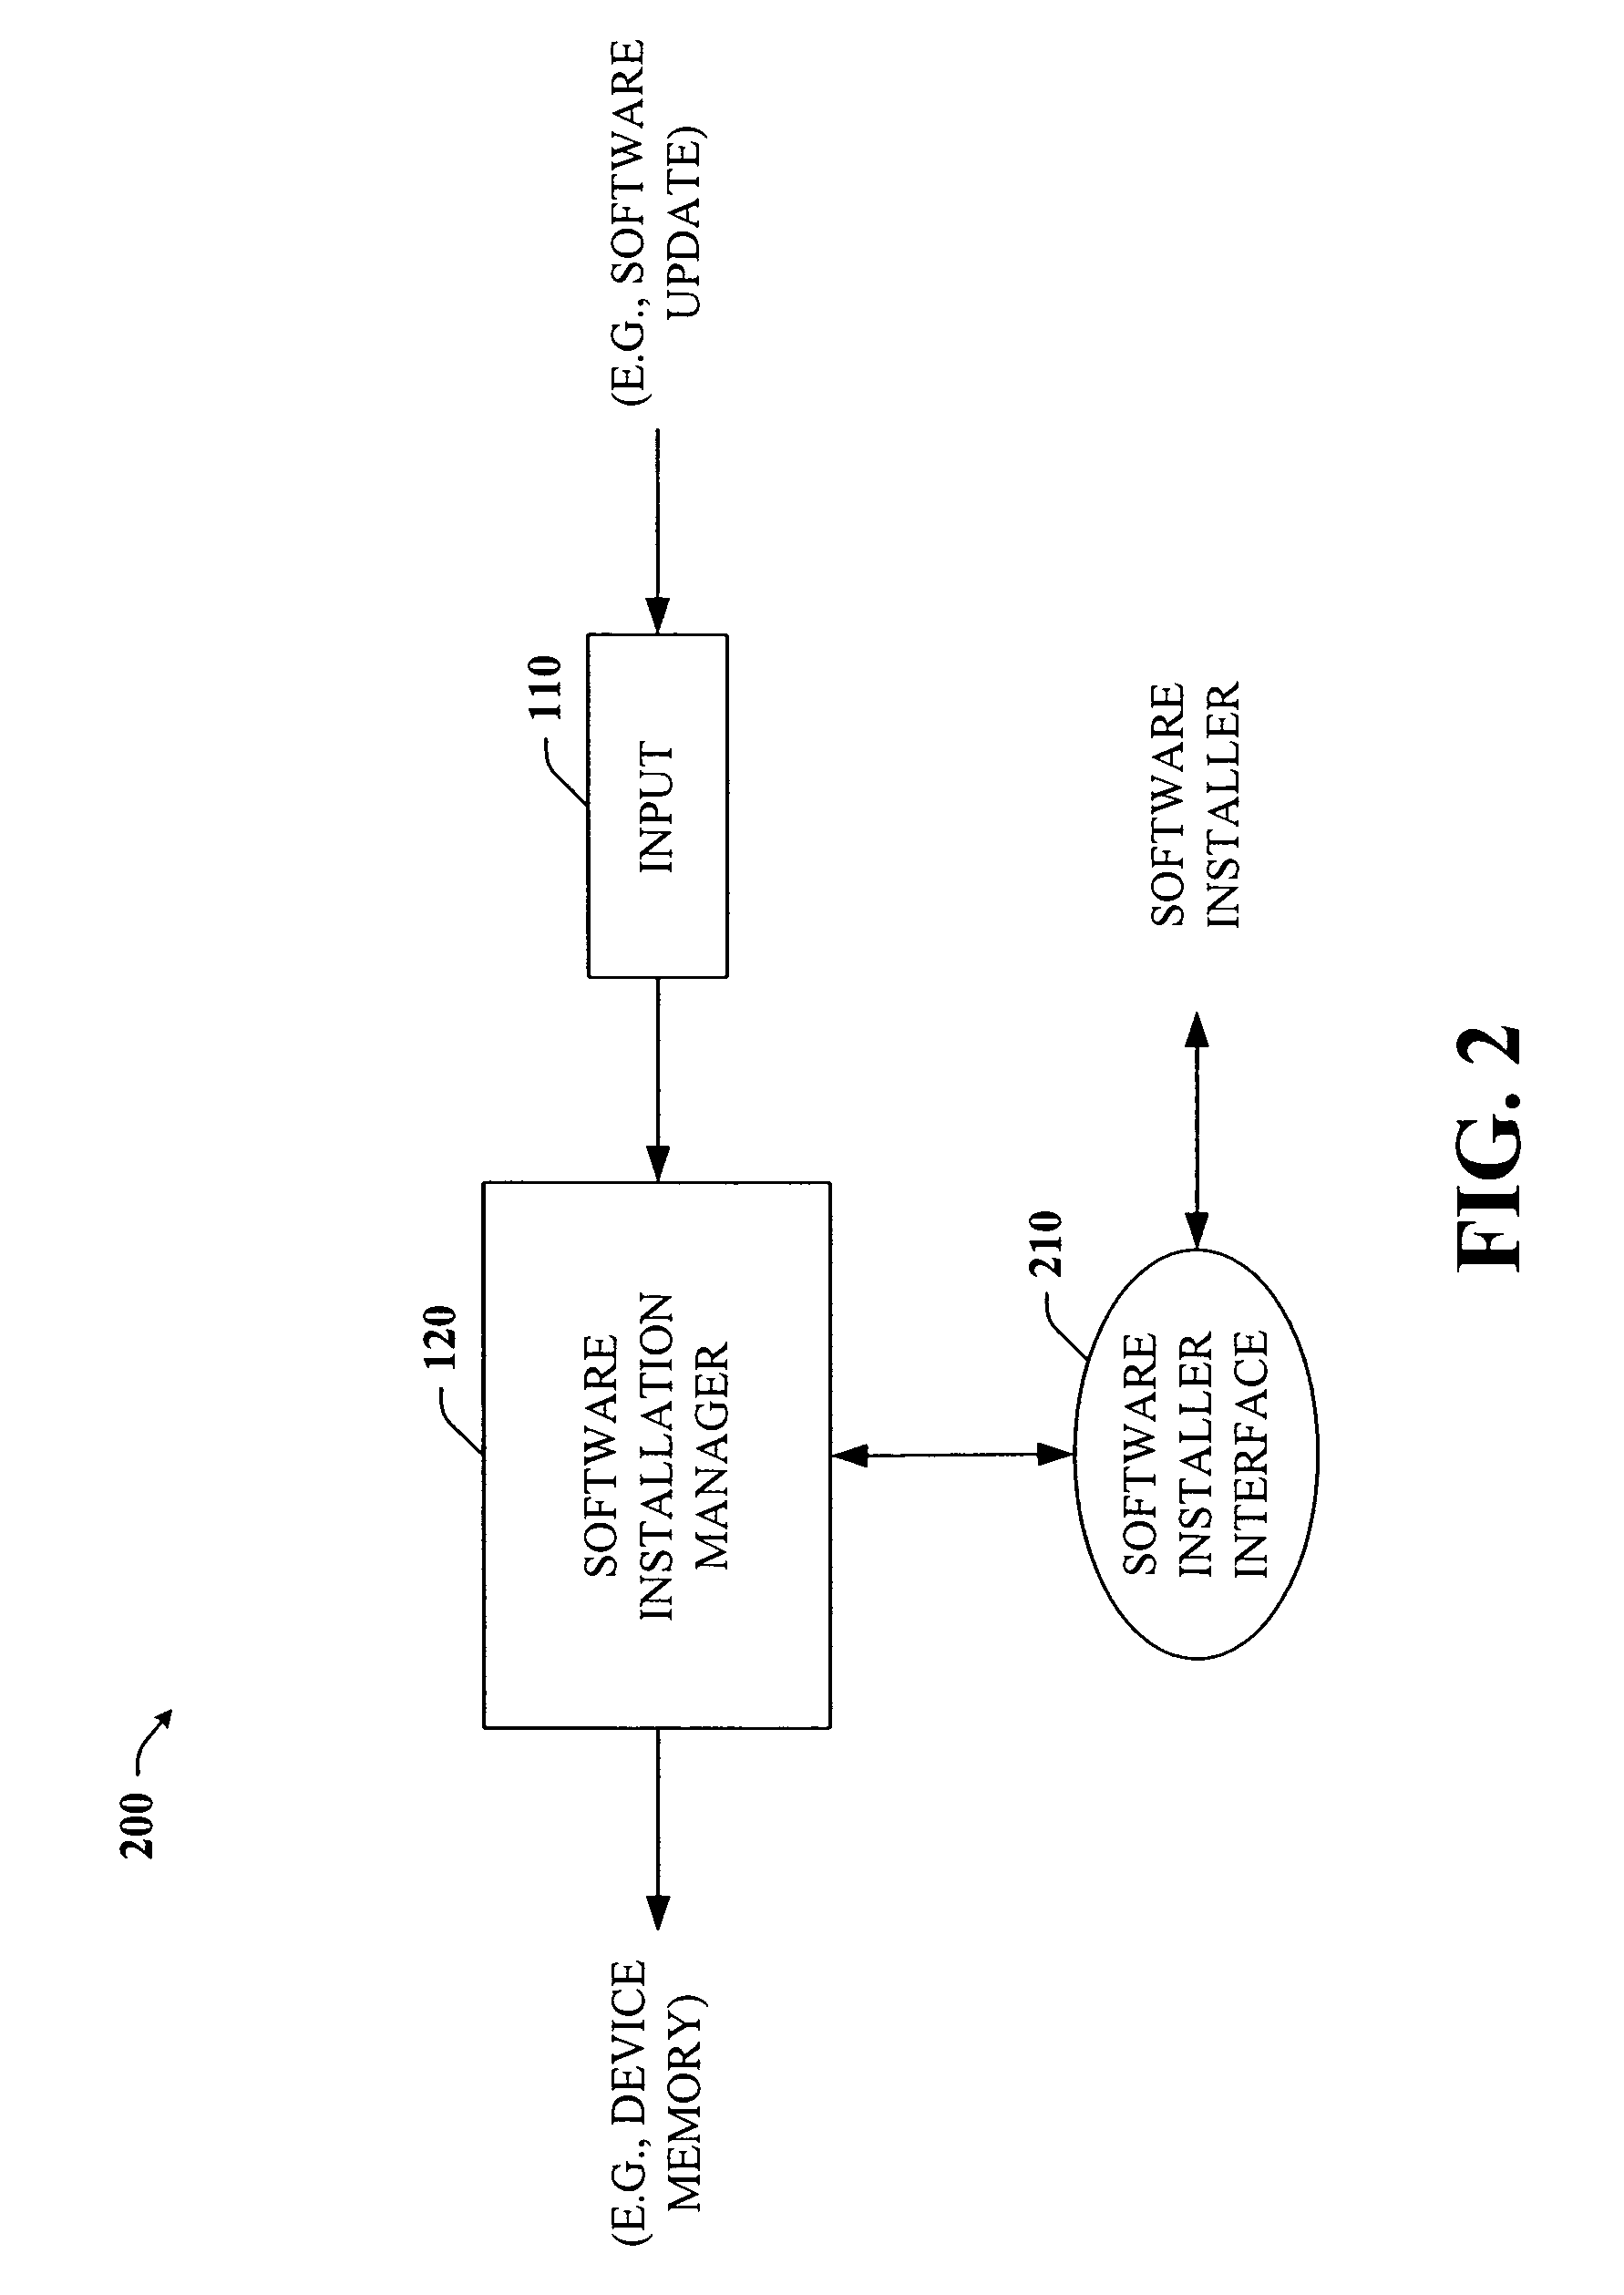 Systems and methods that facilitate software installation customization